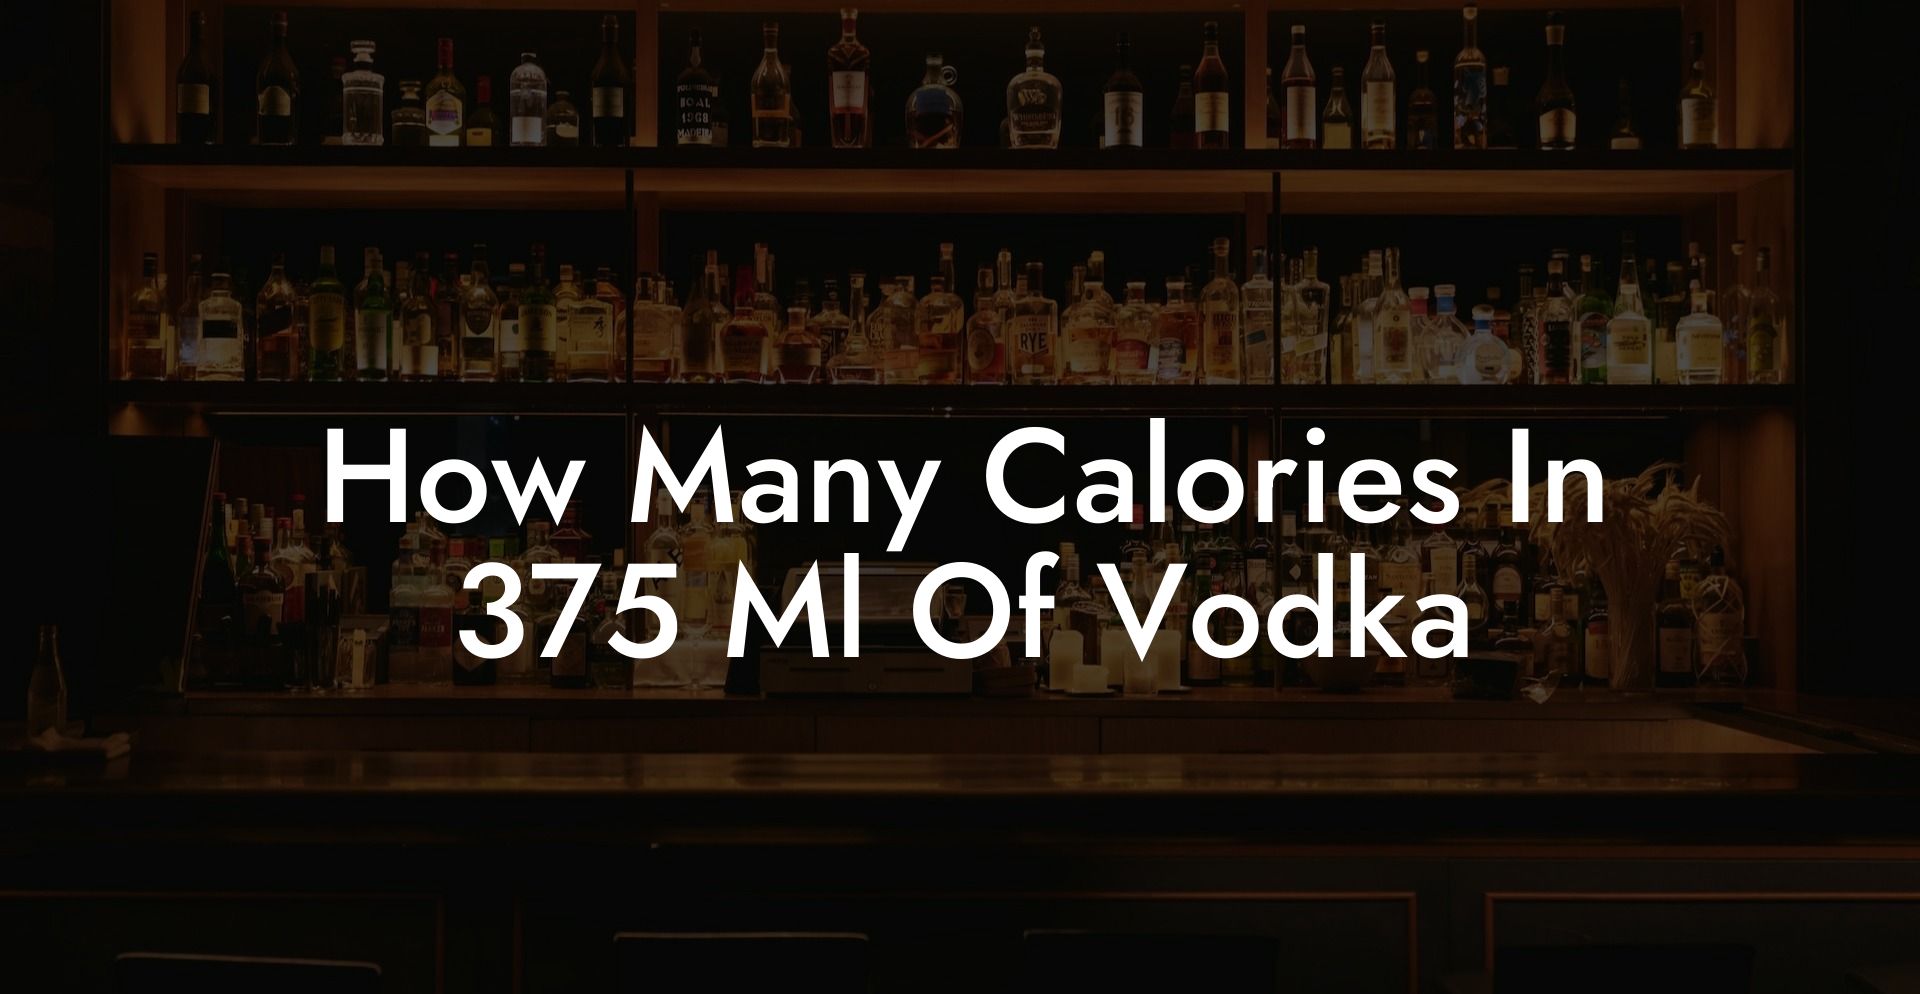 How Many Calories In 375 Ml Of Vodka